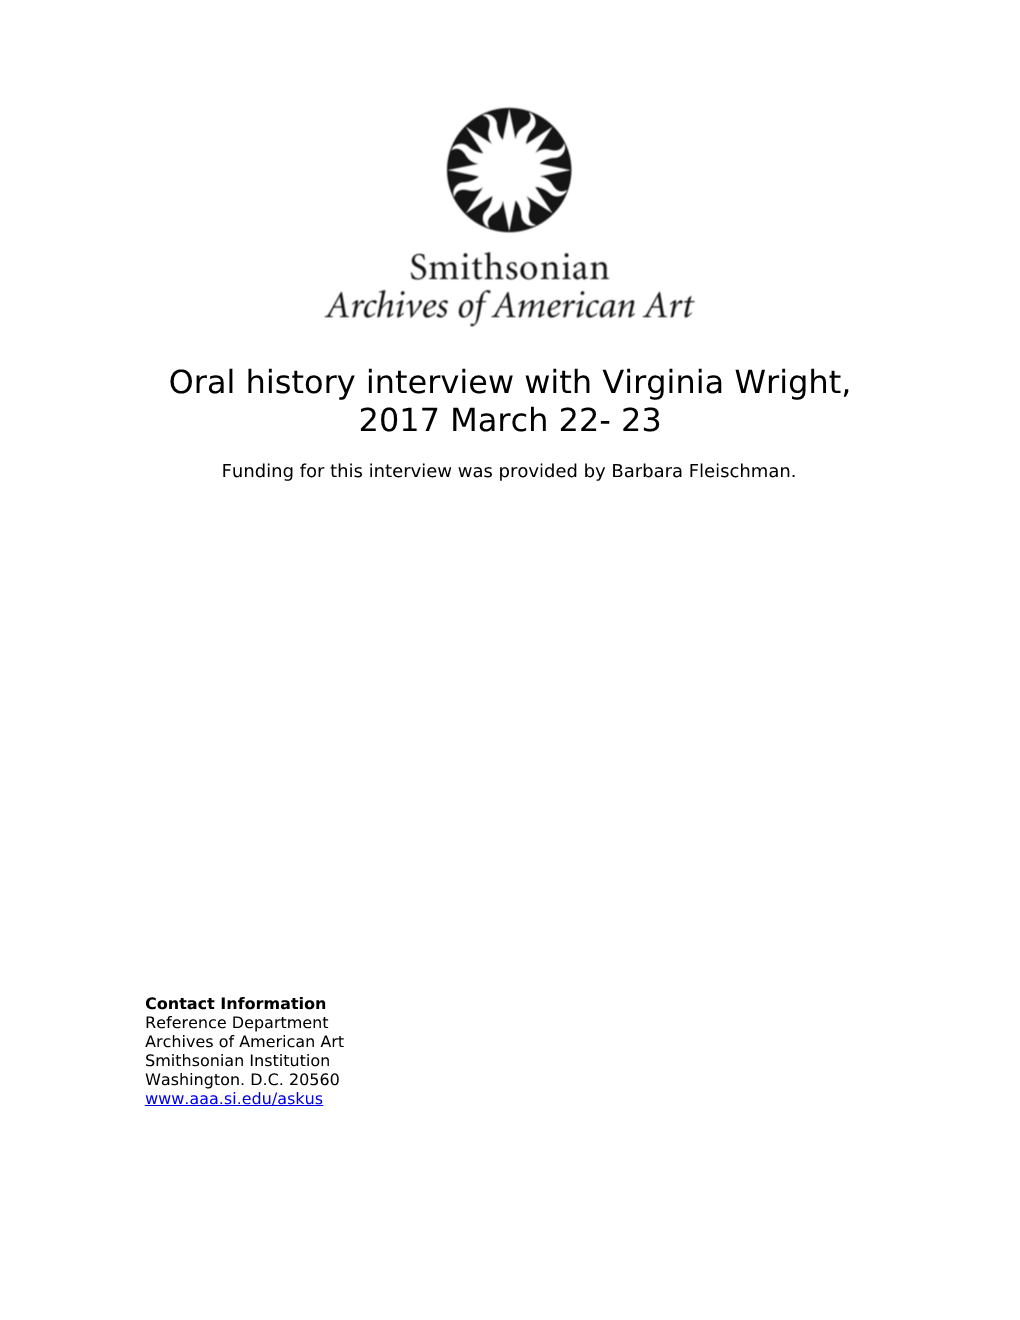 Oral History Interview with Virginia Wright, 2017 March 22- 23